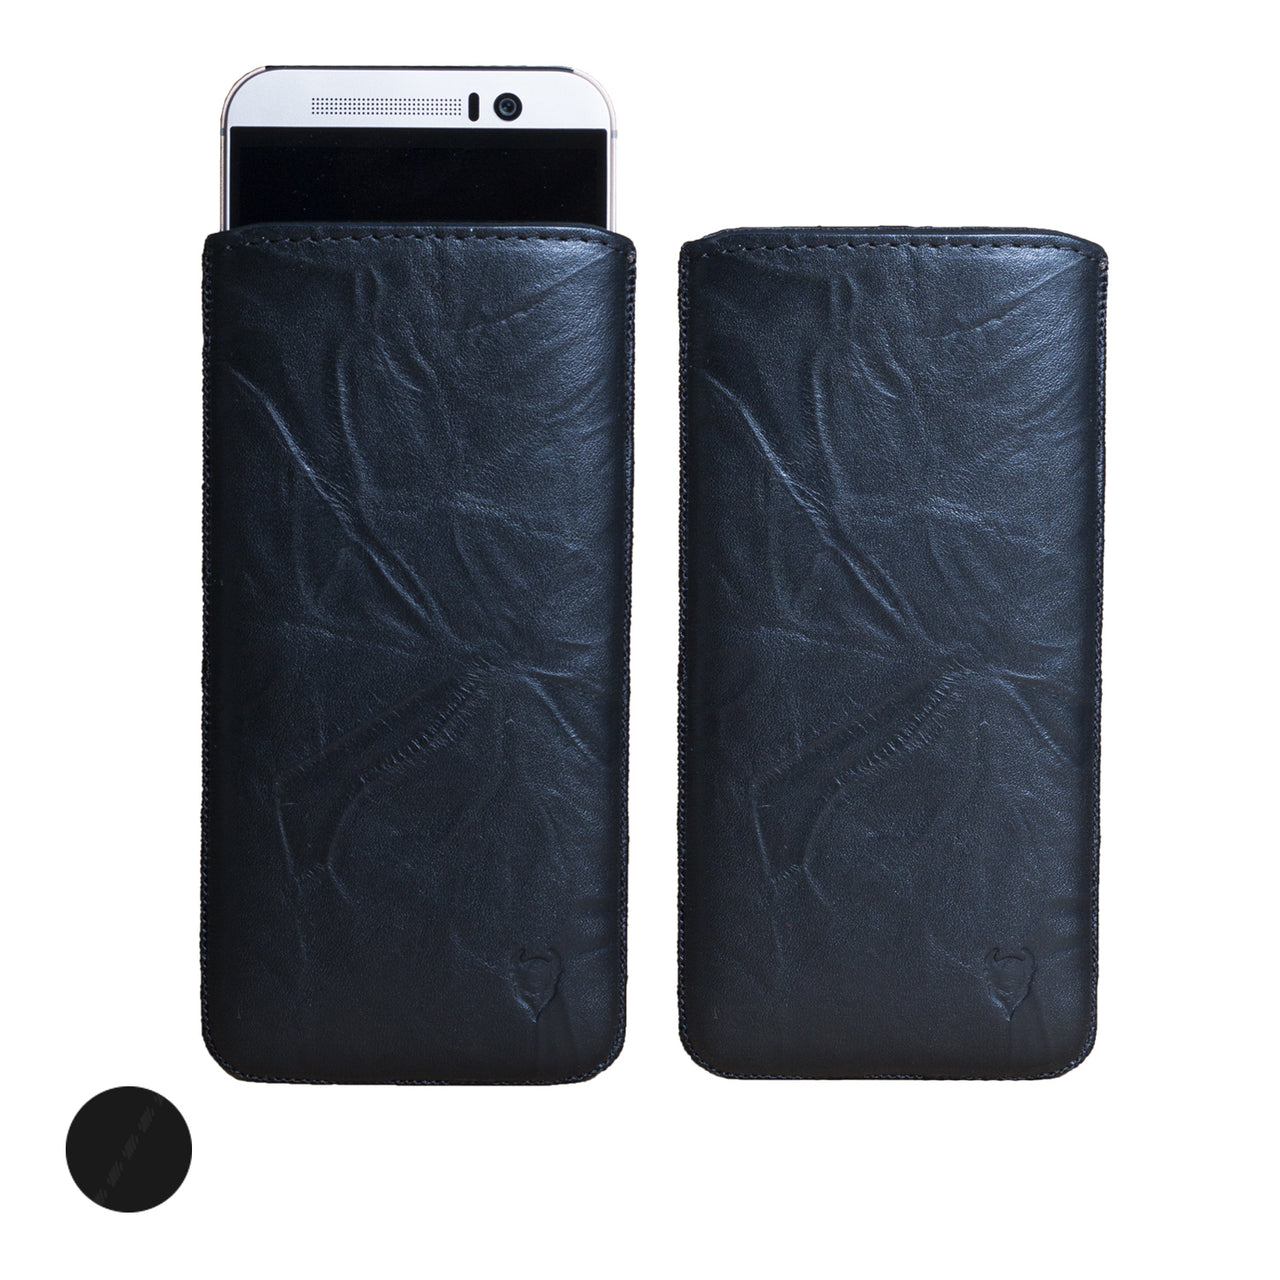 HTC One M9 Genuine Leather Pouch Sleeve Case | Artisanpouch